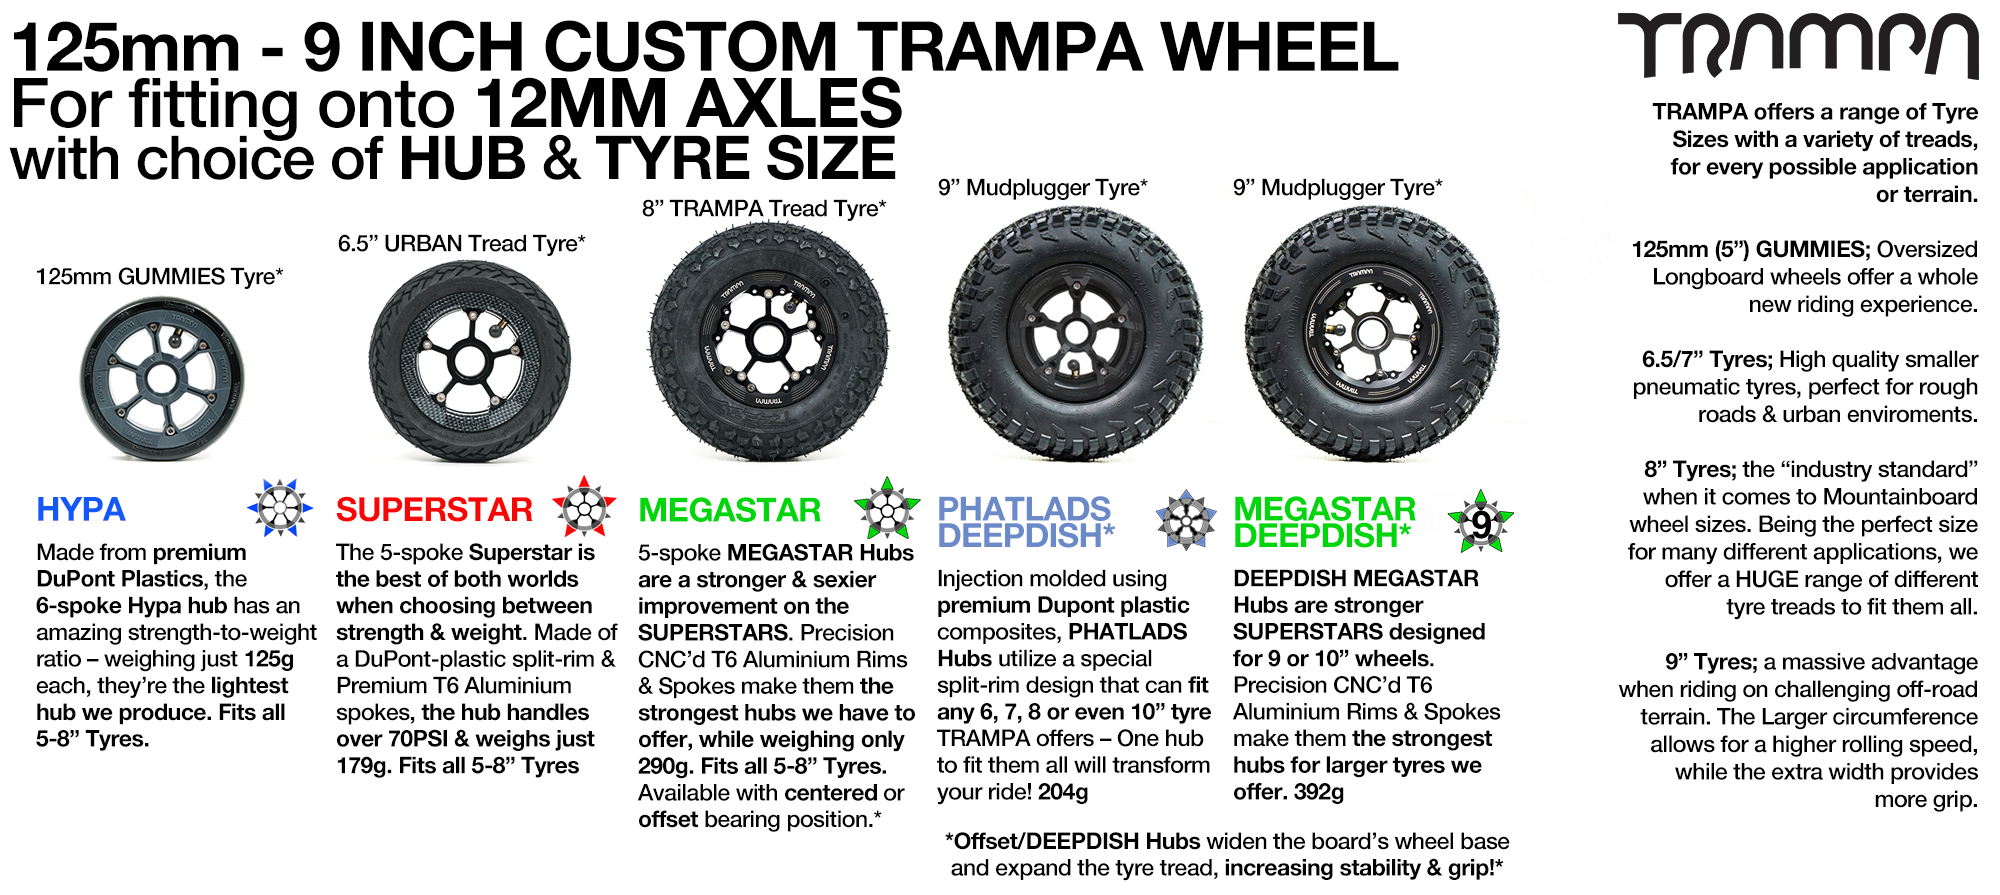 TRAMPA Wheels that fit to 9.525mm Axles - HYPA, SUPERSTAR, 8 Inch MEGASTAR, 9 Inch PRIMO or DEEP DISH MEGASTAR & now PHATLADS Wheels! Awesome selection from 83mm to 10 Inch, on & off road! 